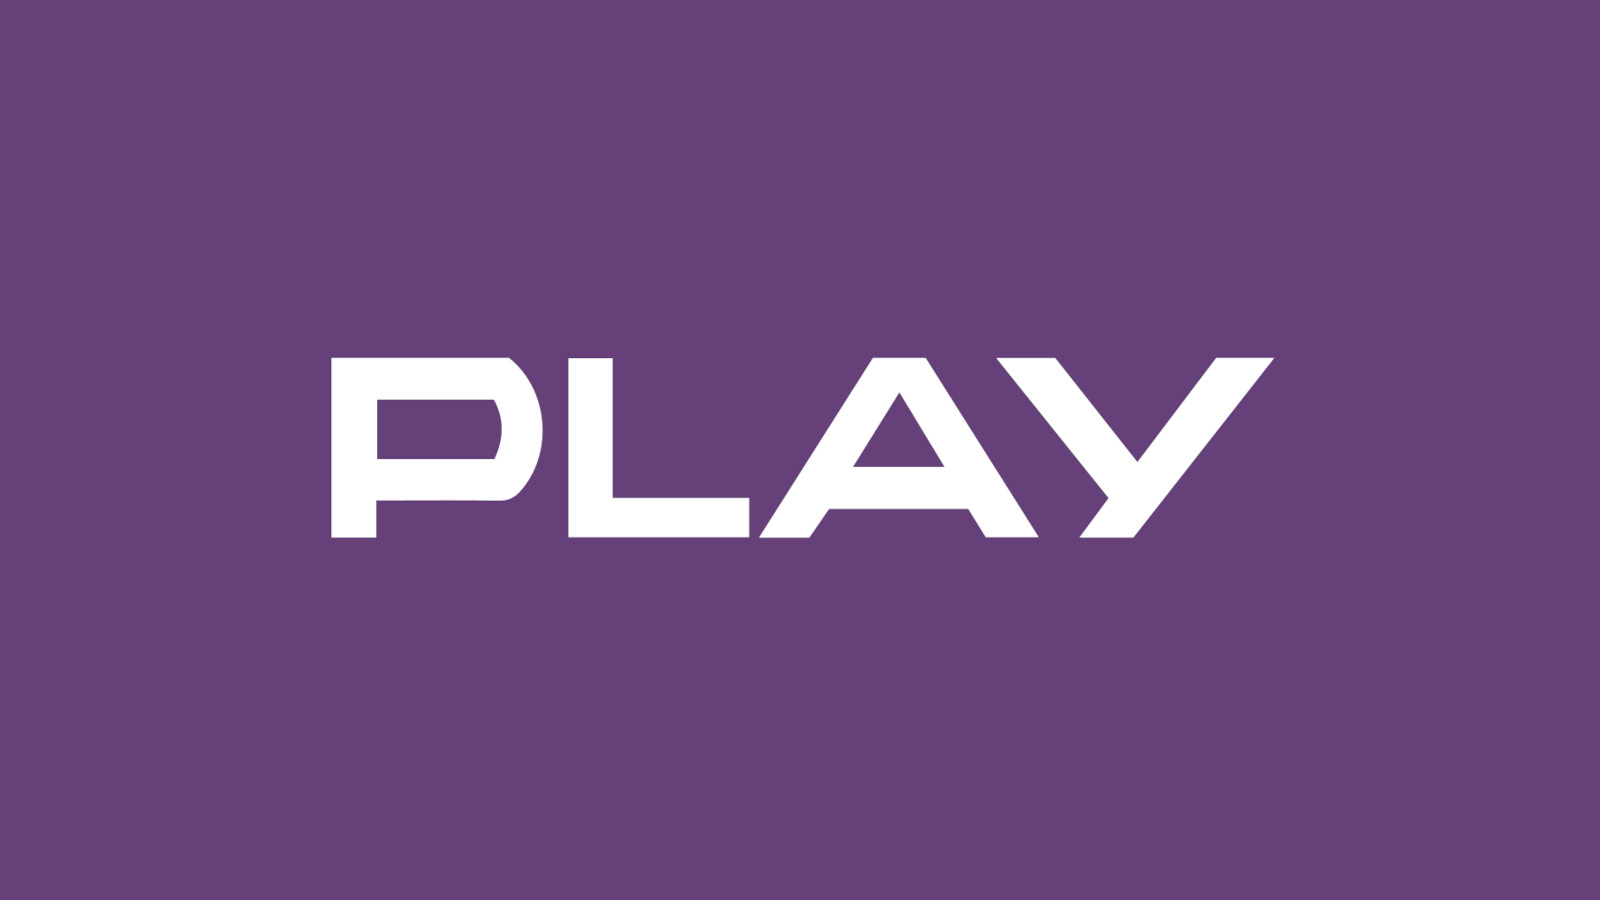 PLAY 30 PLN Mobile Top-up PL [USD 7.93]